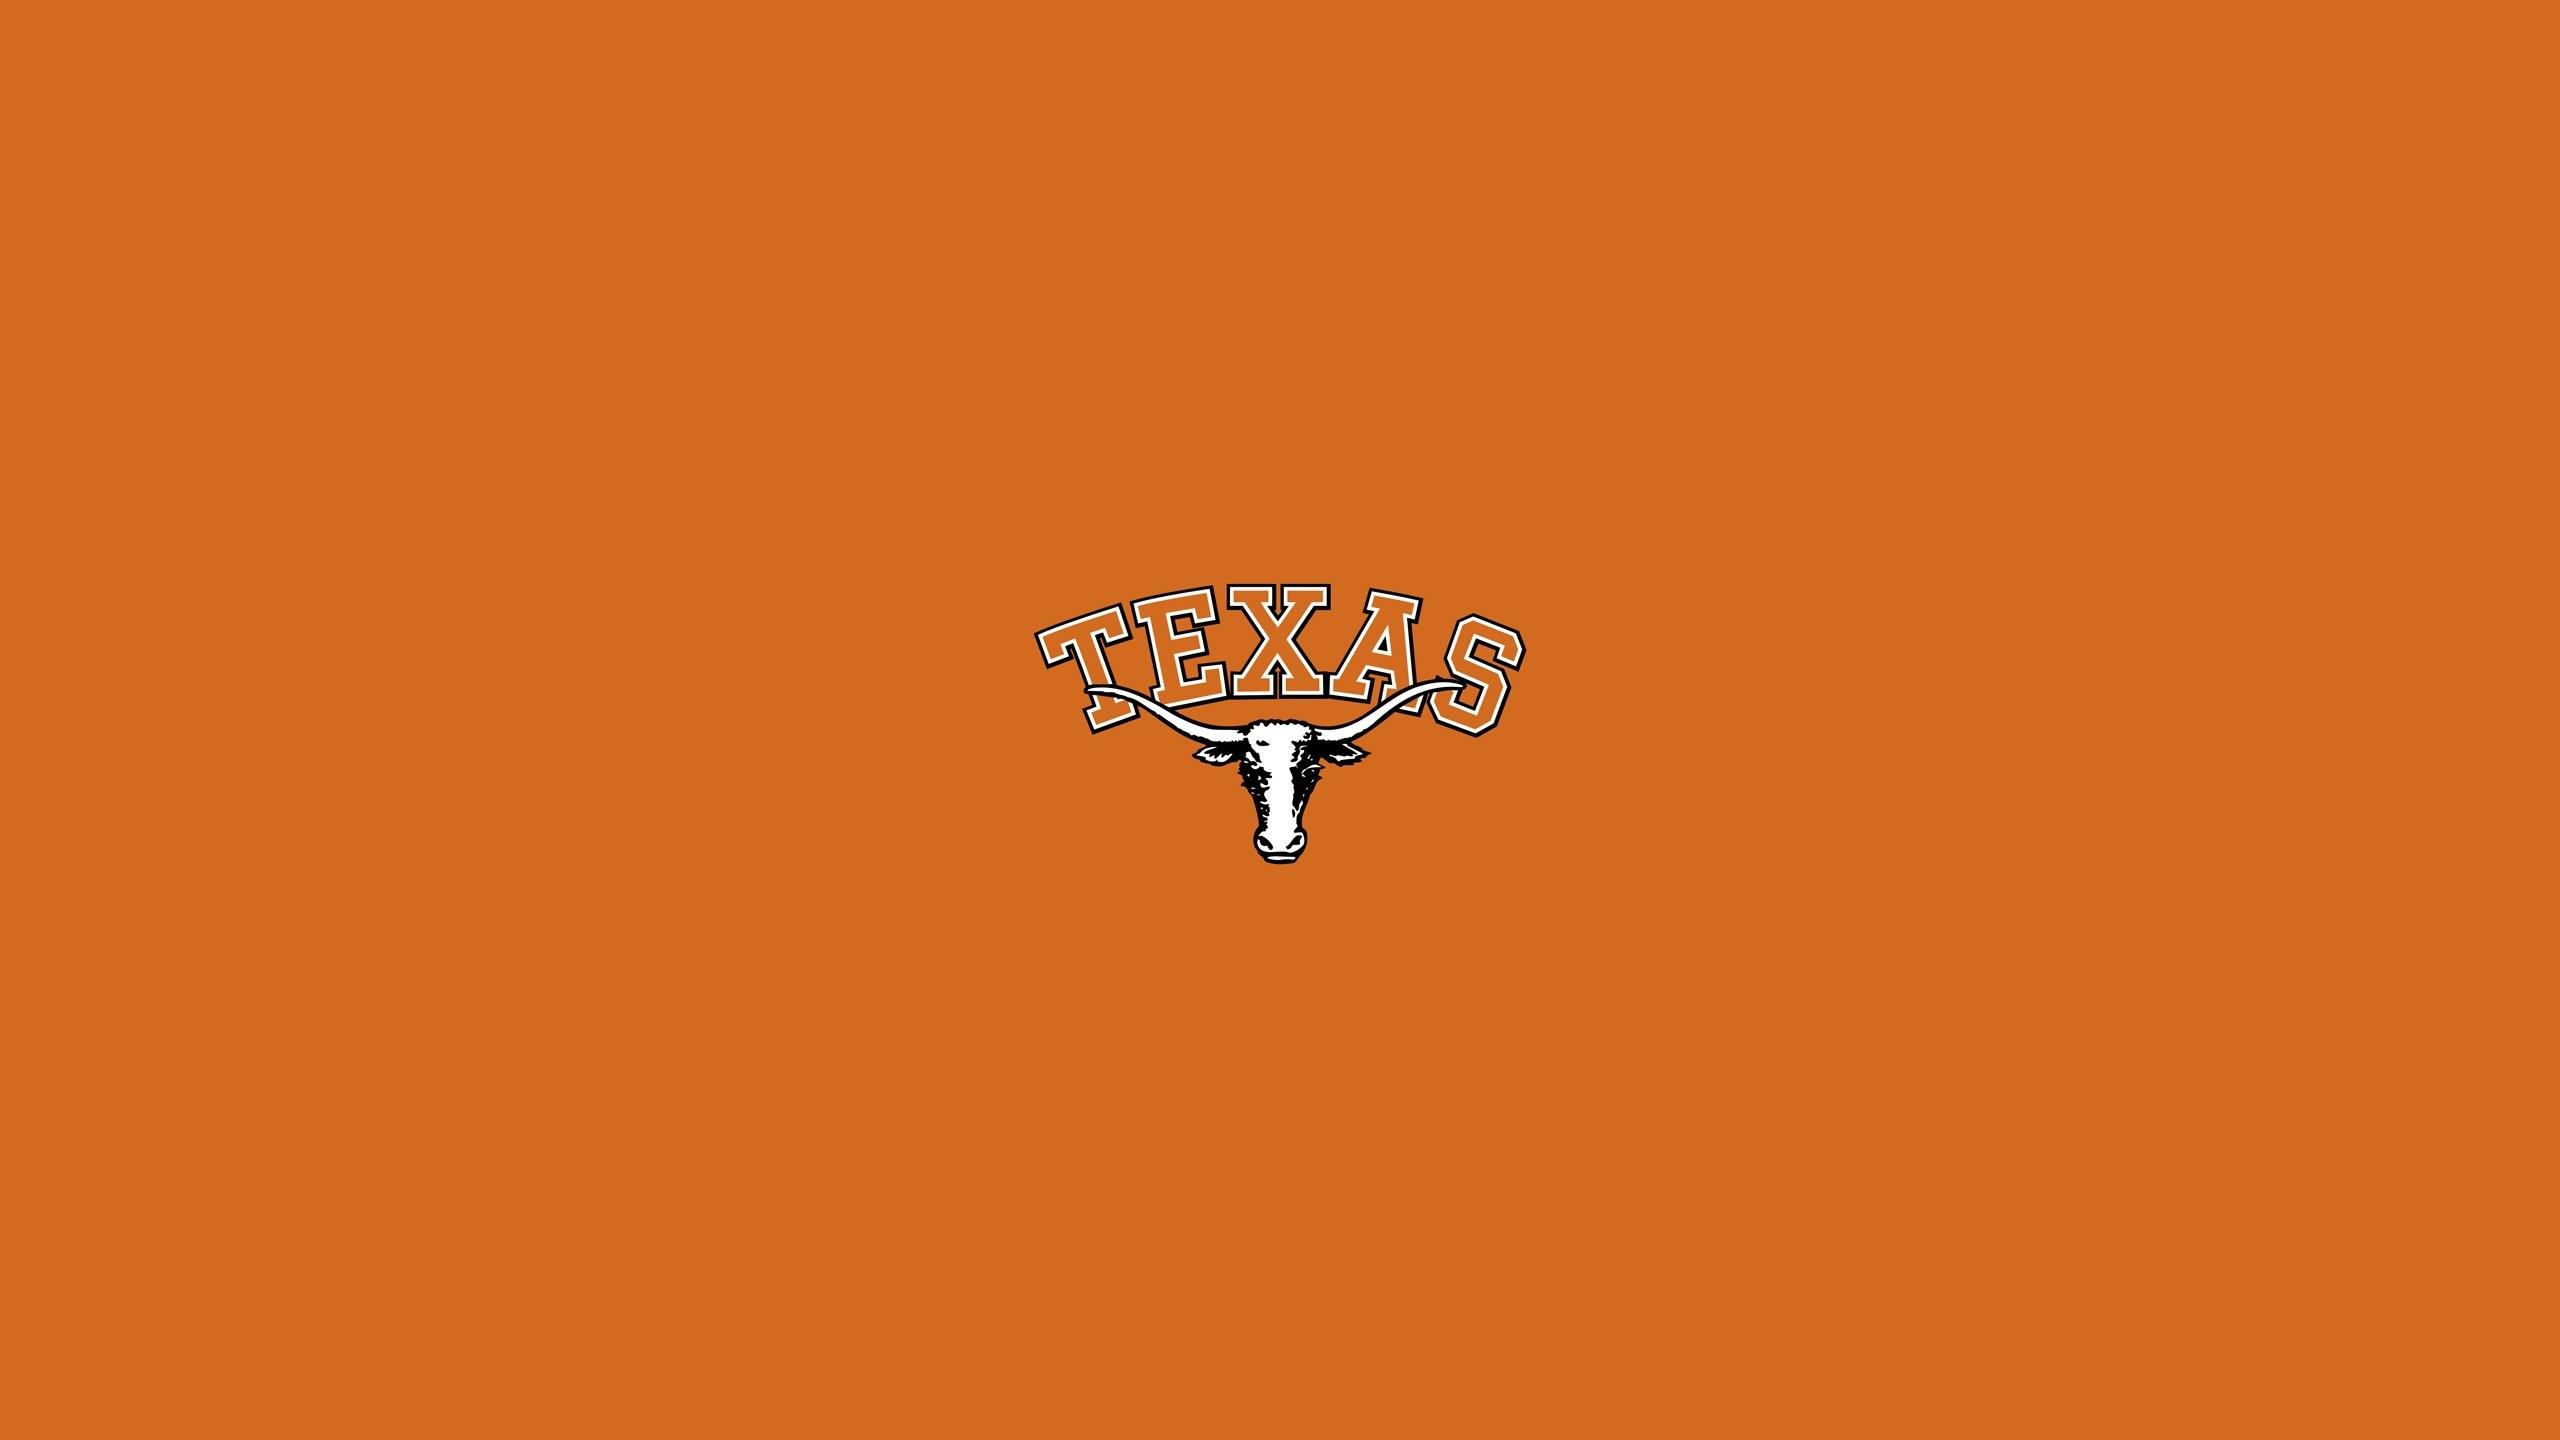 Texas Longhorn Wallpapers - Top Free Texas Longhorn Backgrounds ...